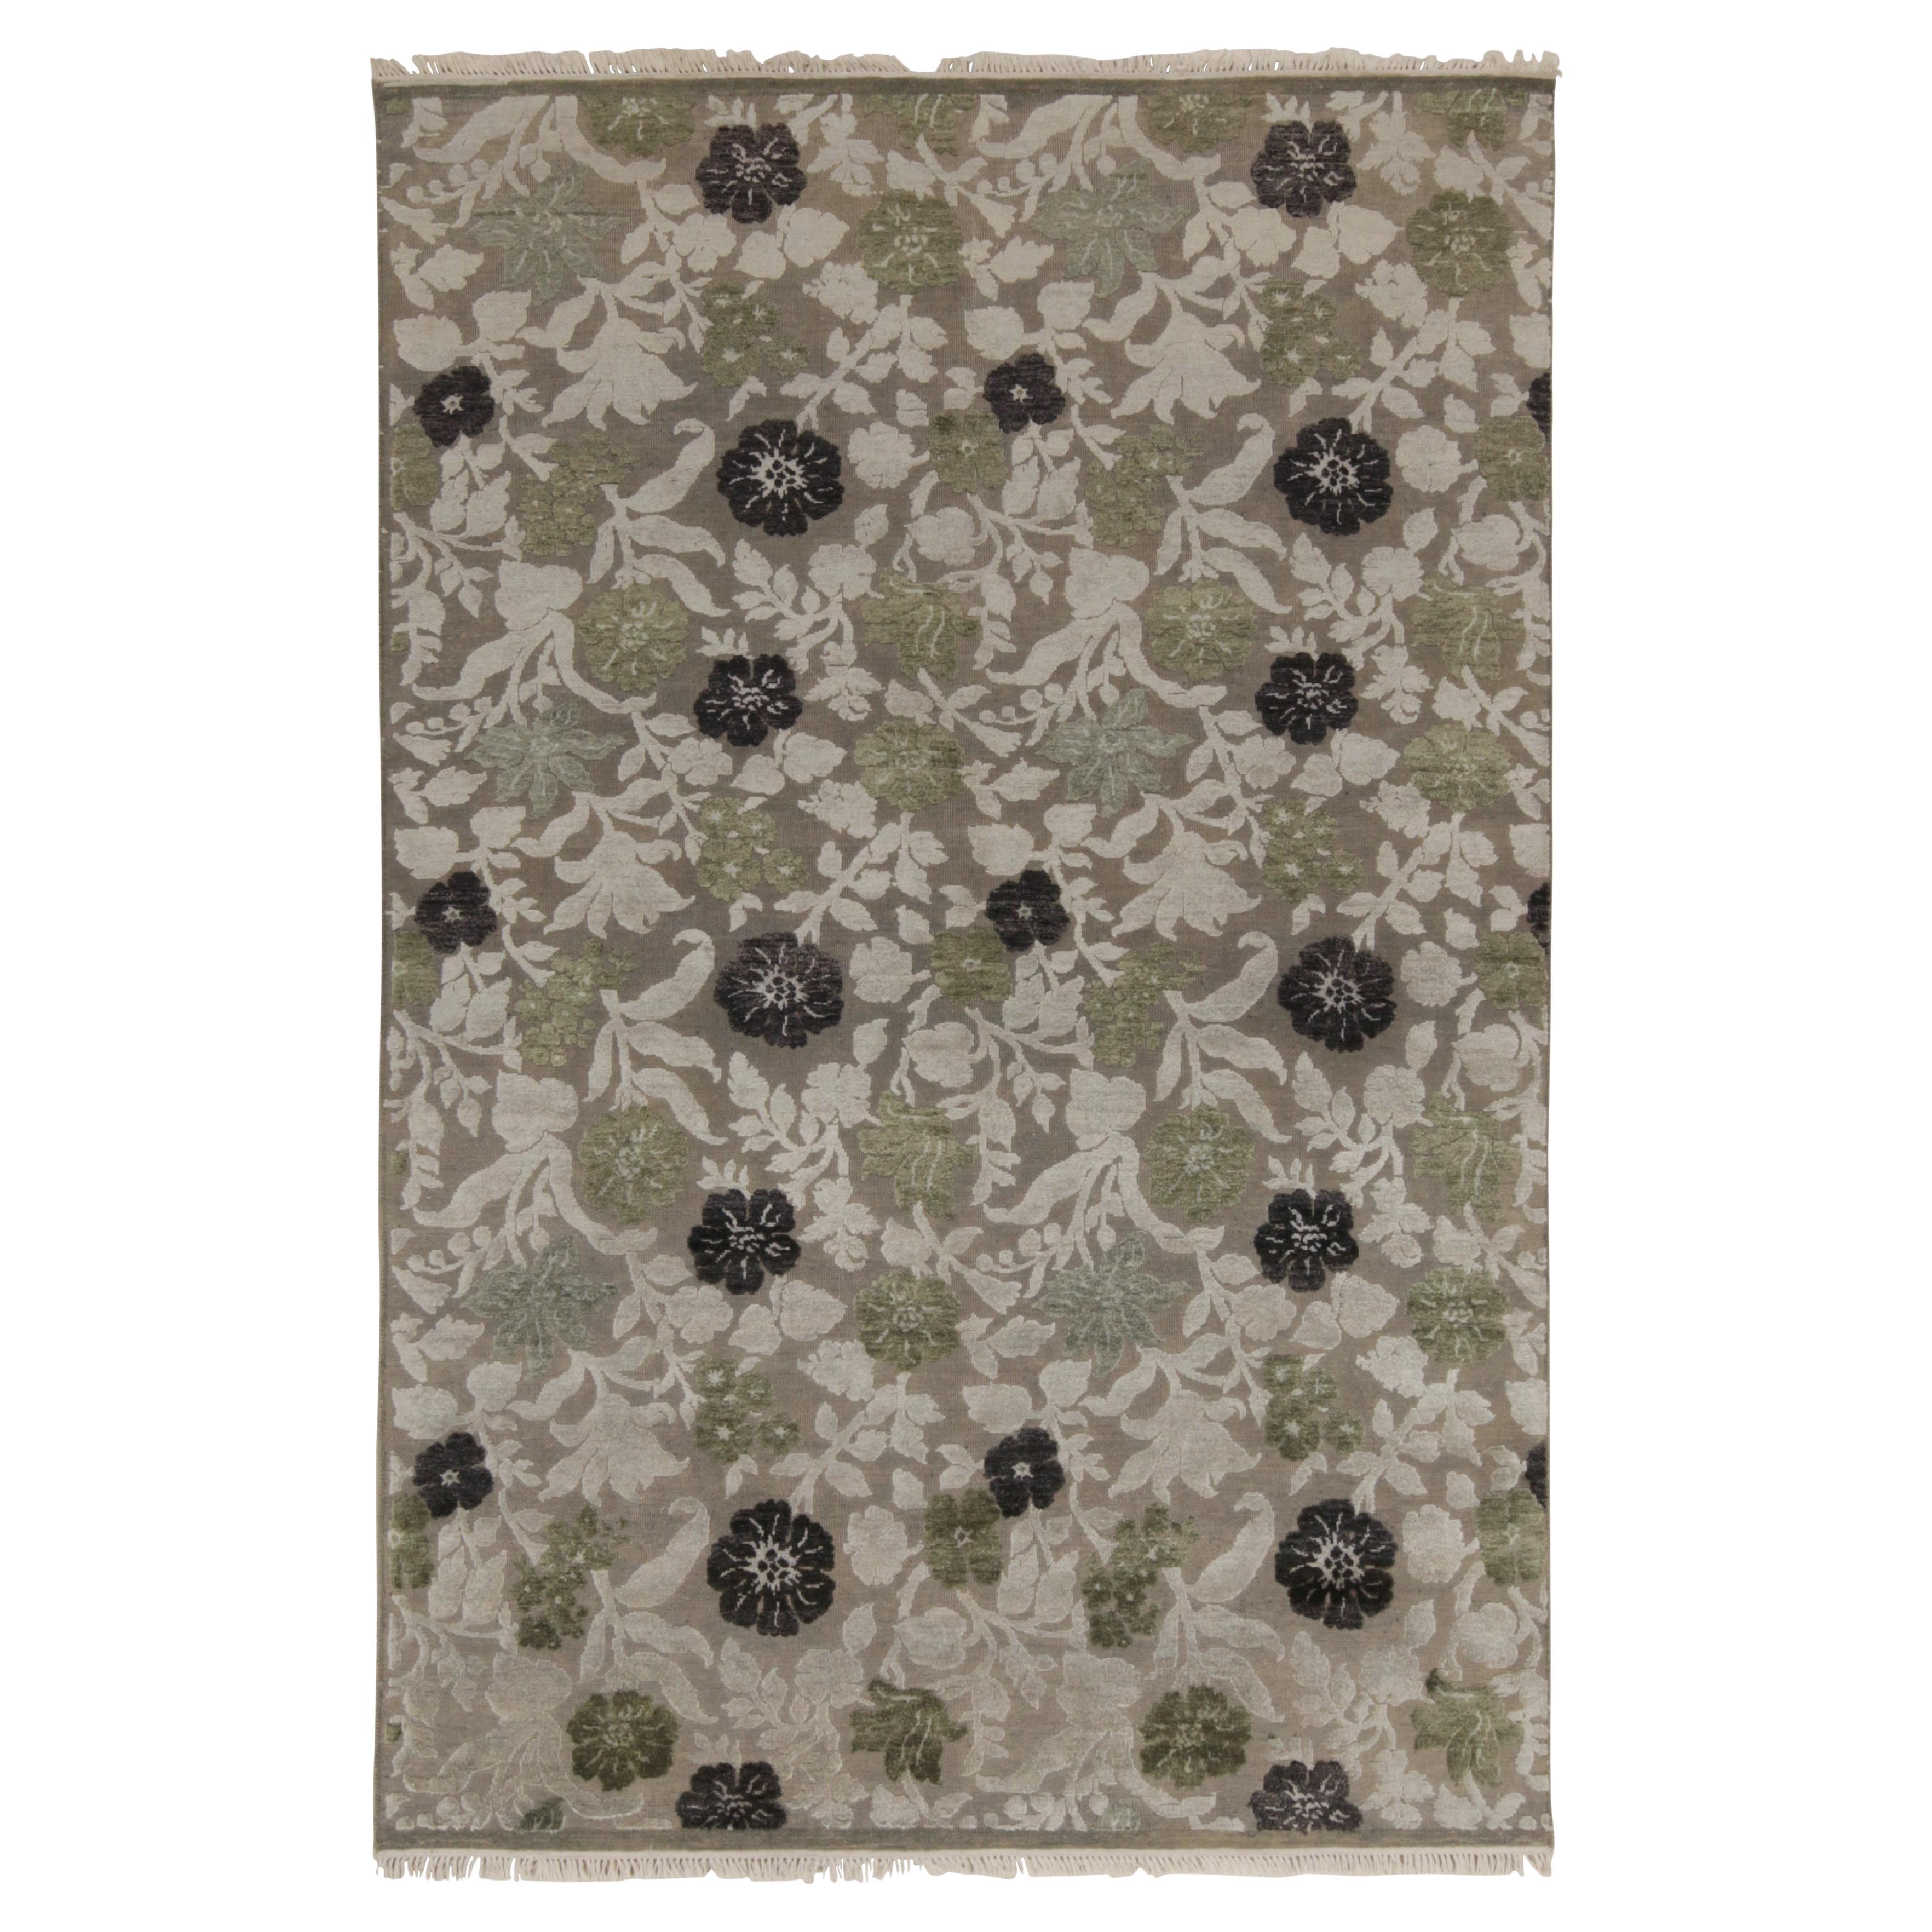 Rug & Kilim’s Contemporary Rug in Beige-Brown, Black and Green Floral Patterns For Sale